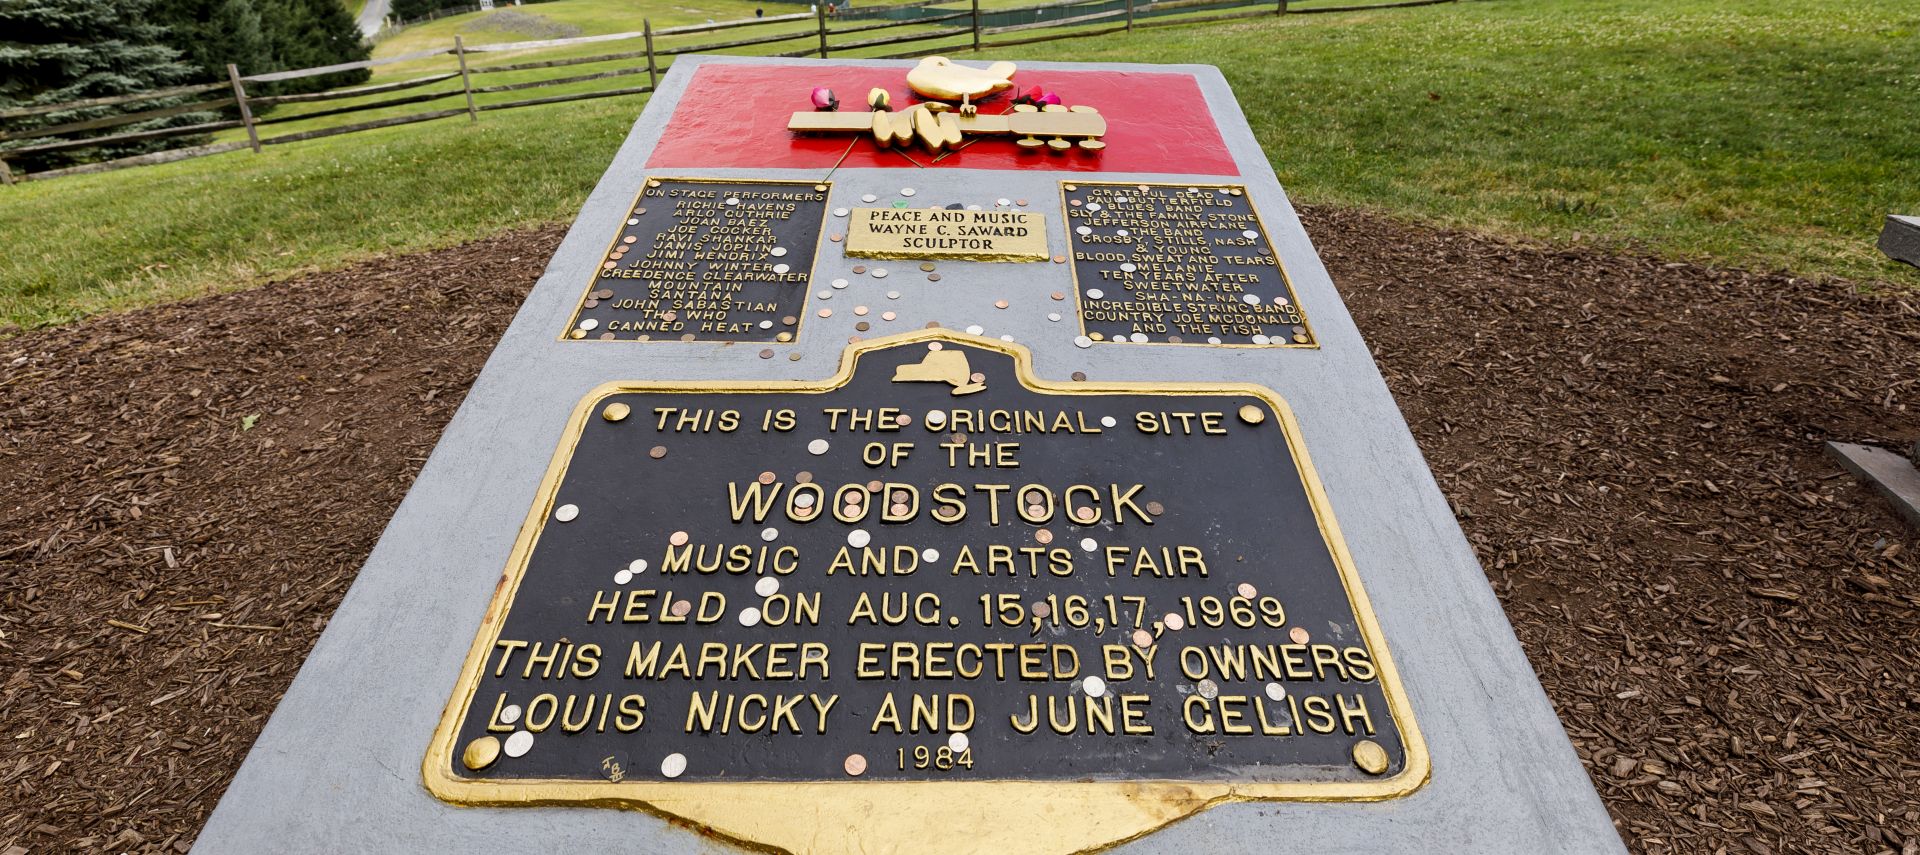 epa07773937 The plaque marking the Woodstock Festival Monument, located at the site of the original Woodstock festival, in Bethel, New York, USA, 14 August 2019. The land, which was once farm land owned by Max Yasgur and is now shared by Bethel Woods Center for the Arts, was the site of the famous concert on 15, 16 and 17 August 1969.  EPA/JUSTIN LANE